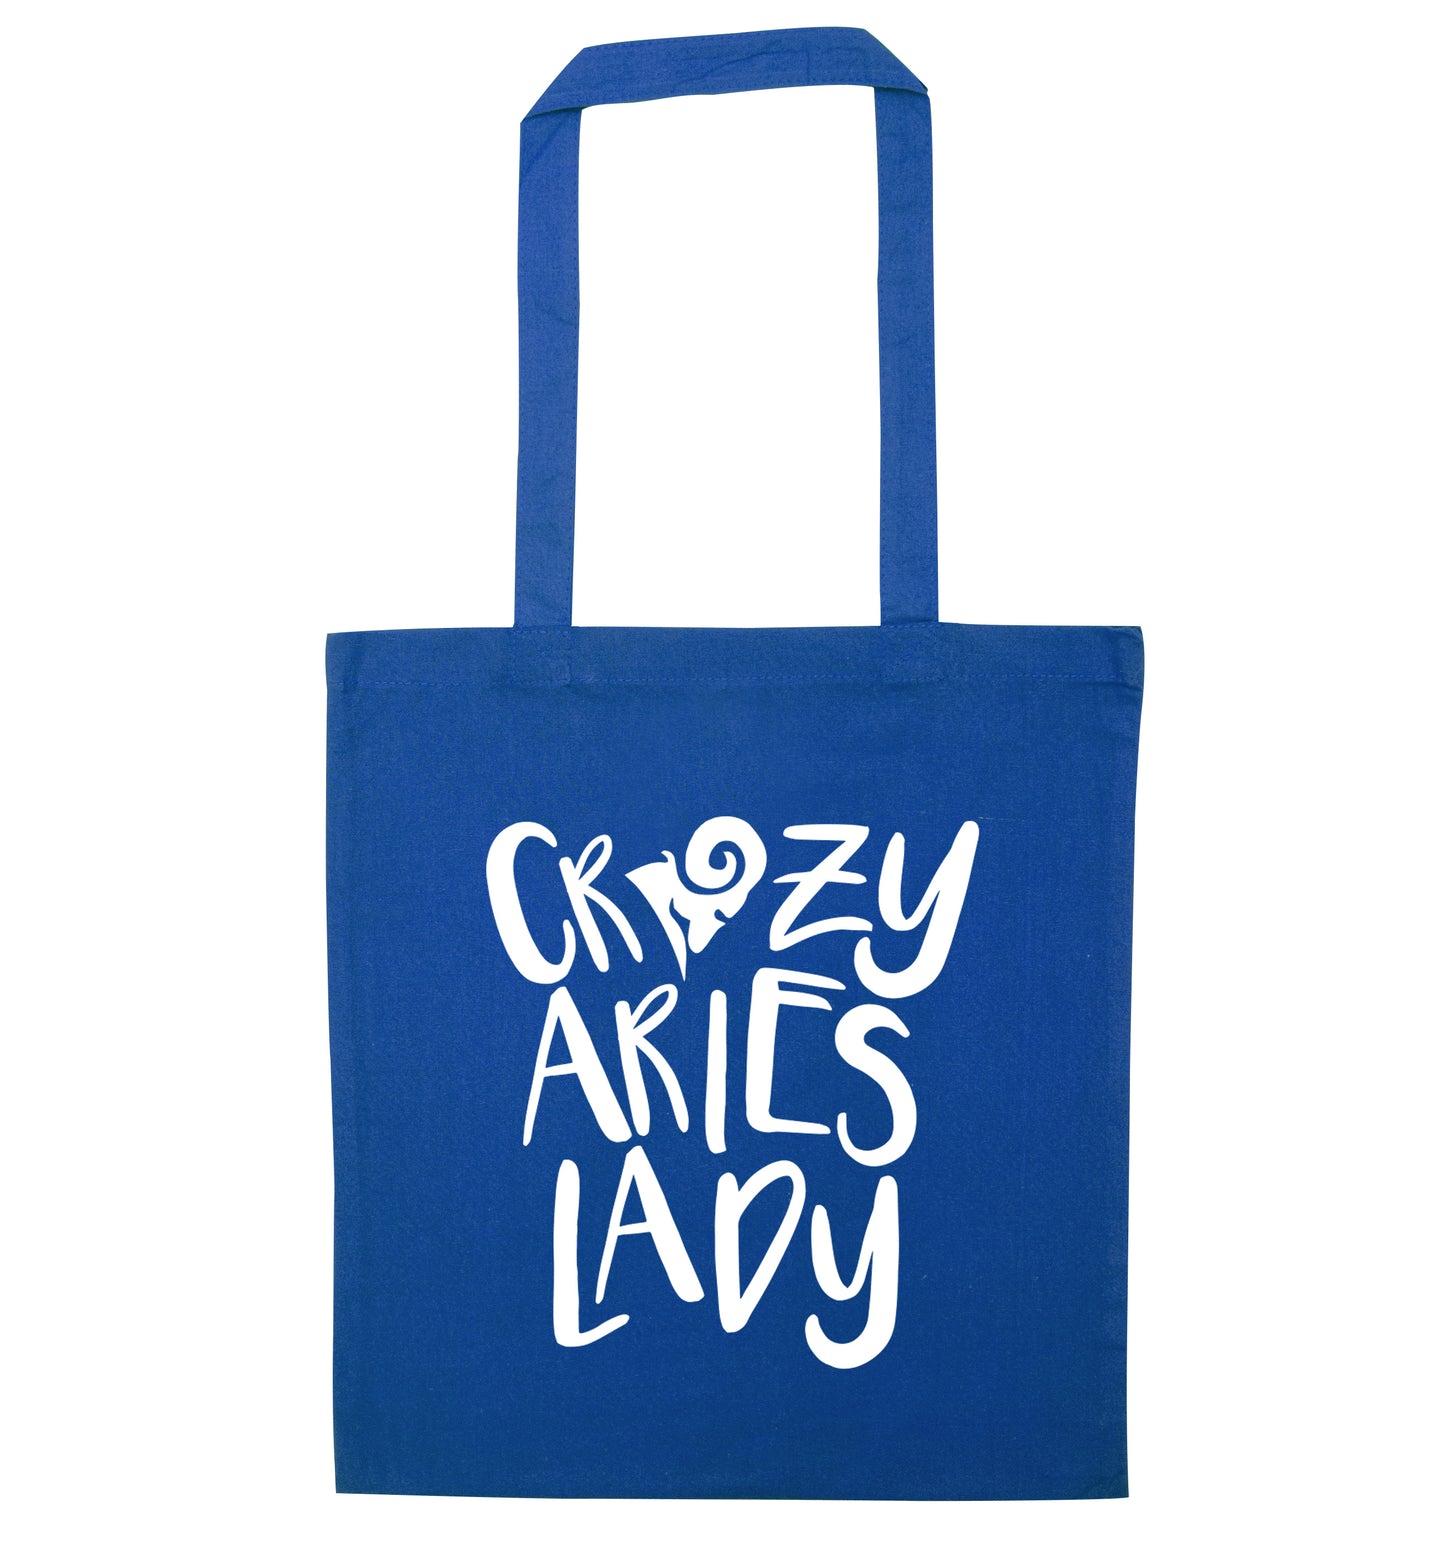 Crazy aries lady blue tote bag